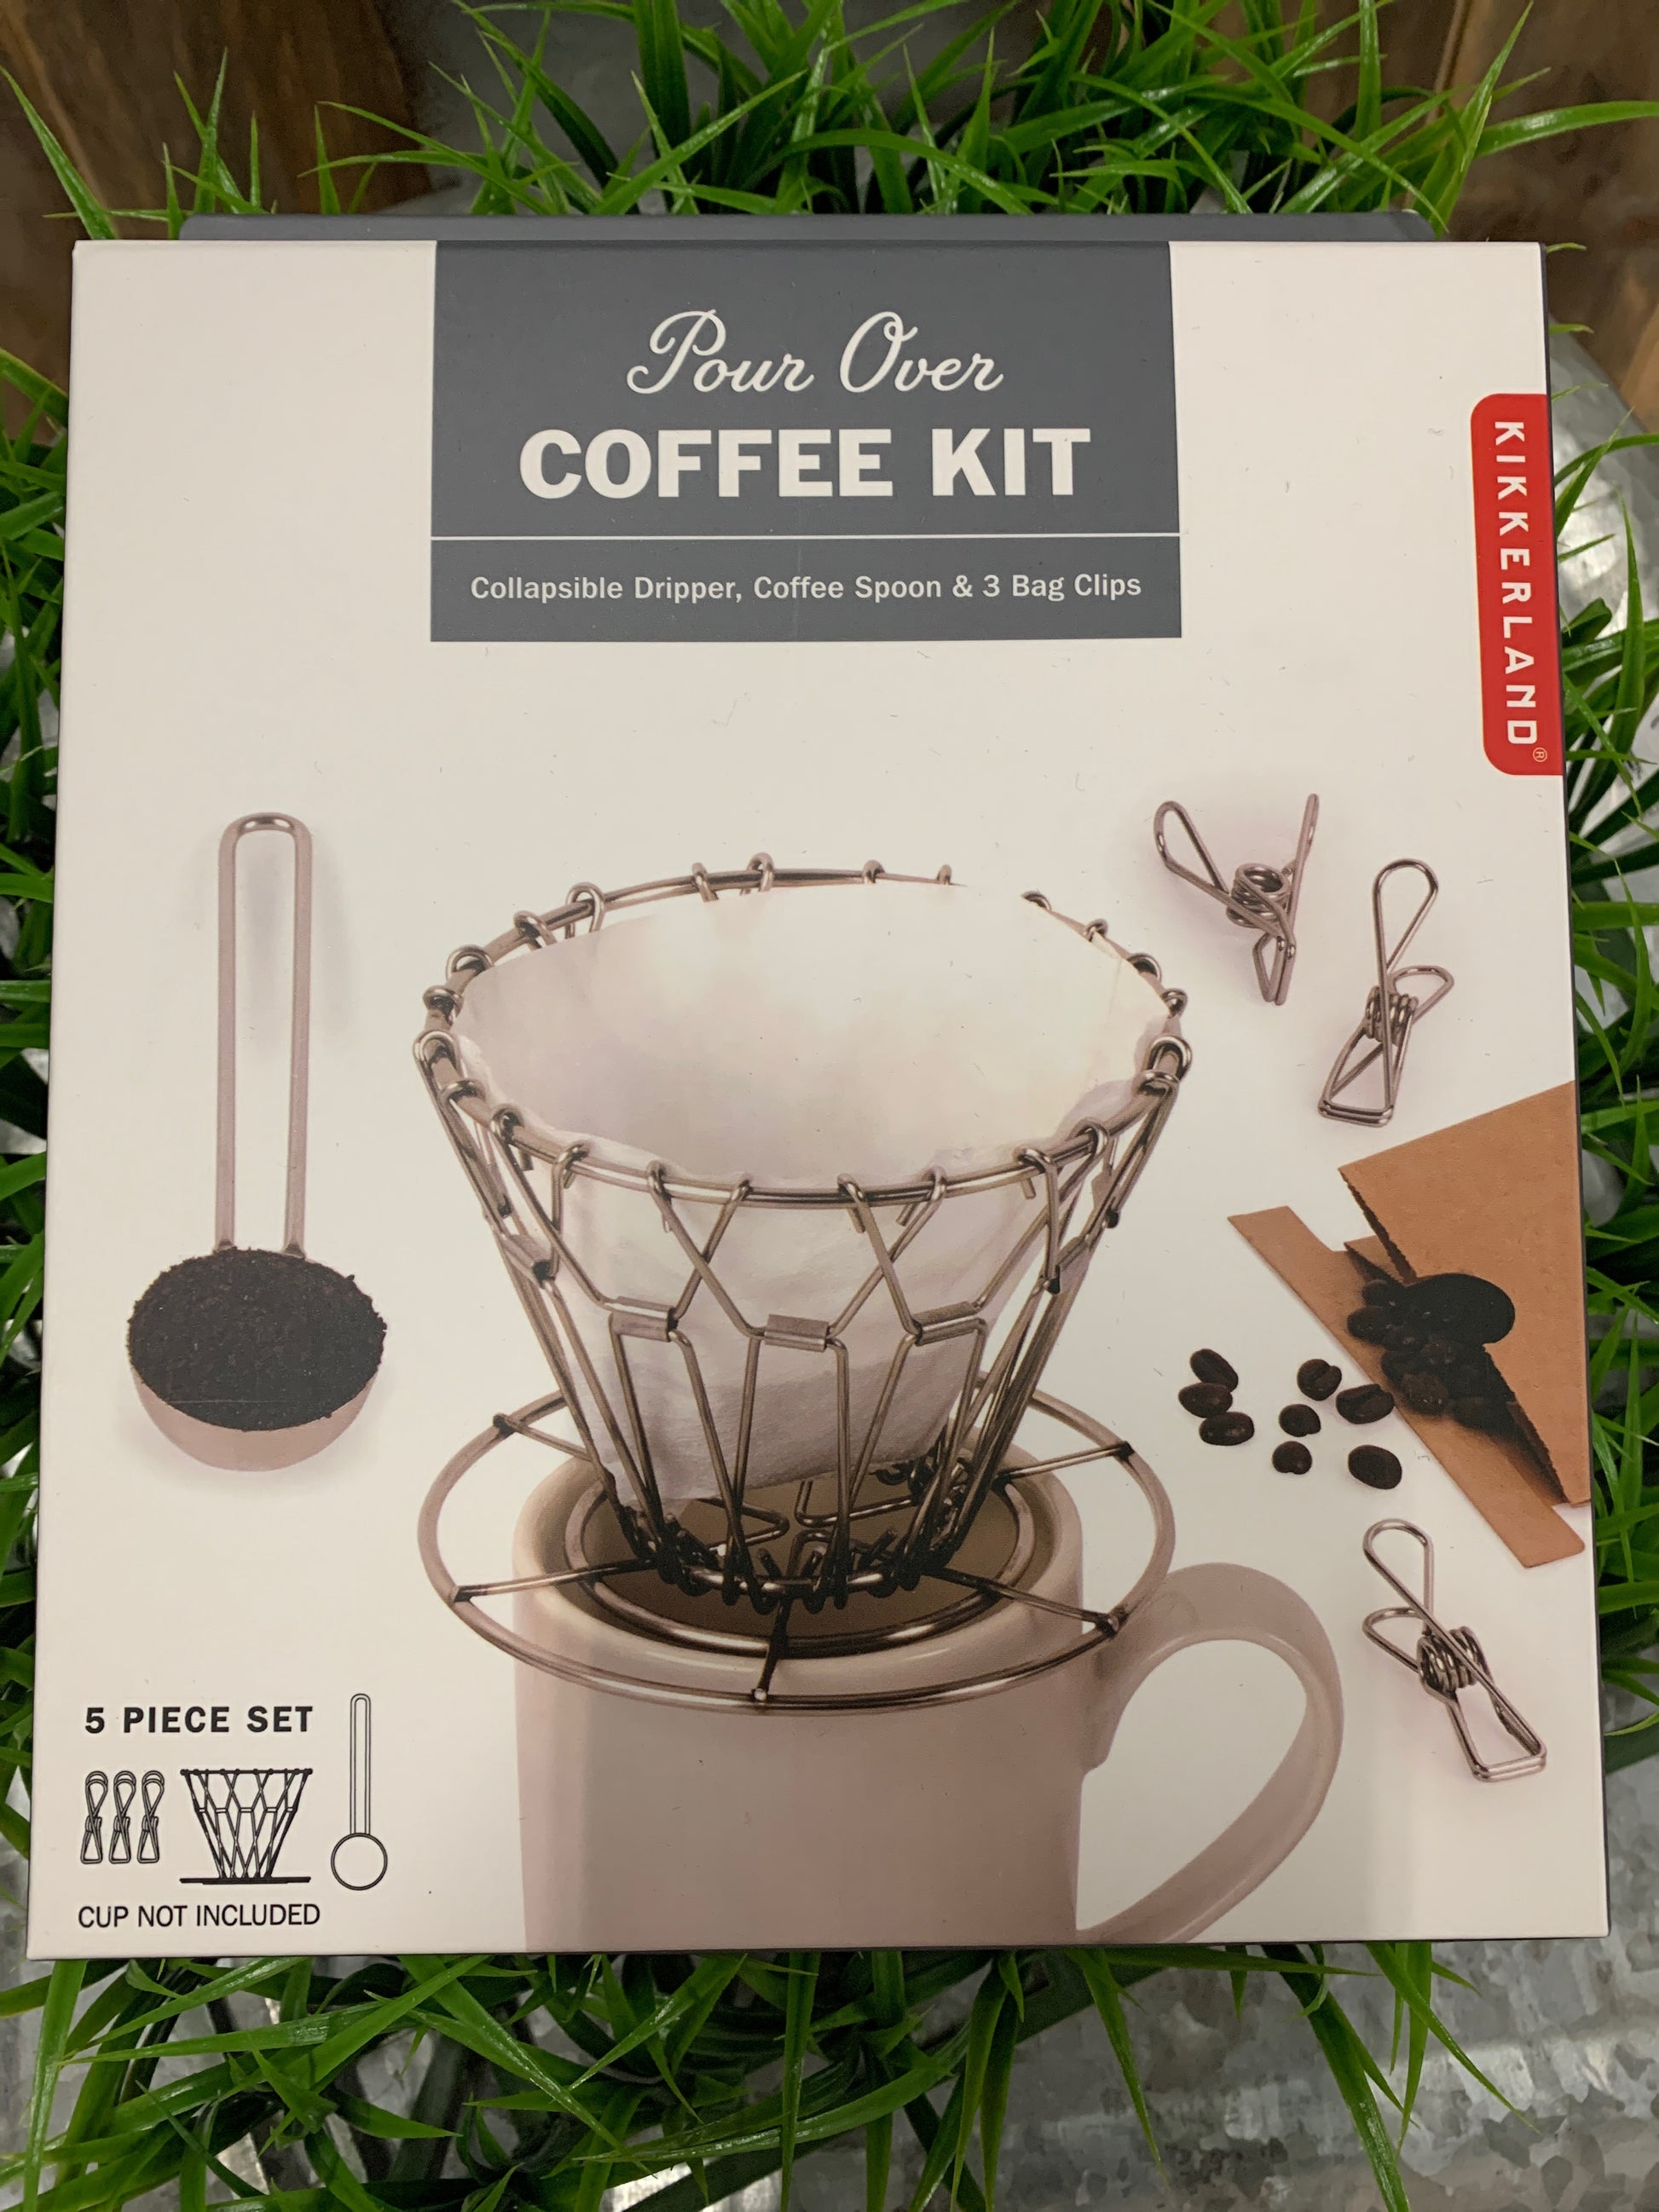  5 Piece Set Includes: Collapsible coffee dripper, coffee spoon and 3 wire clips. Material: Stainless steel CUP NOT INCLUDED 